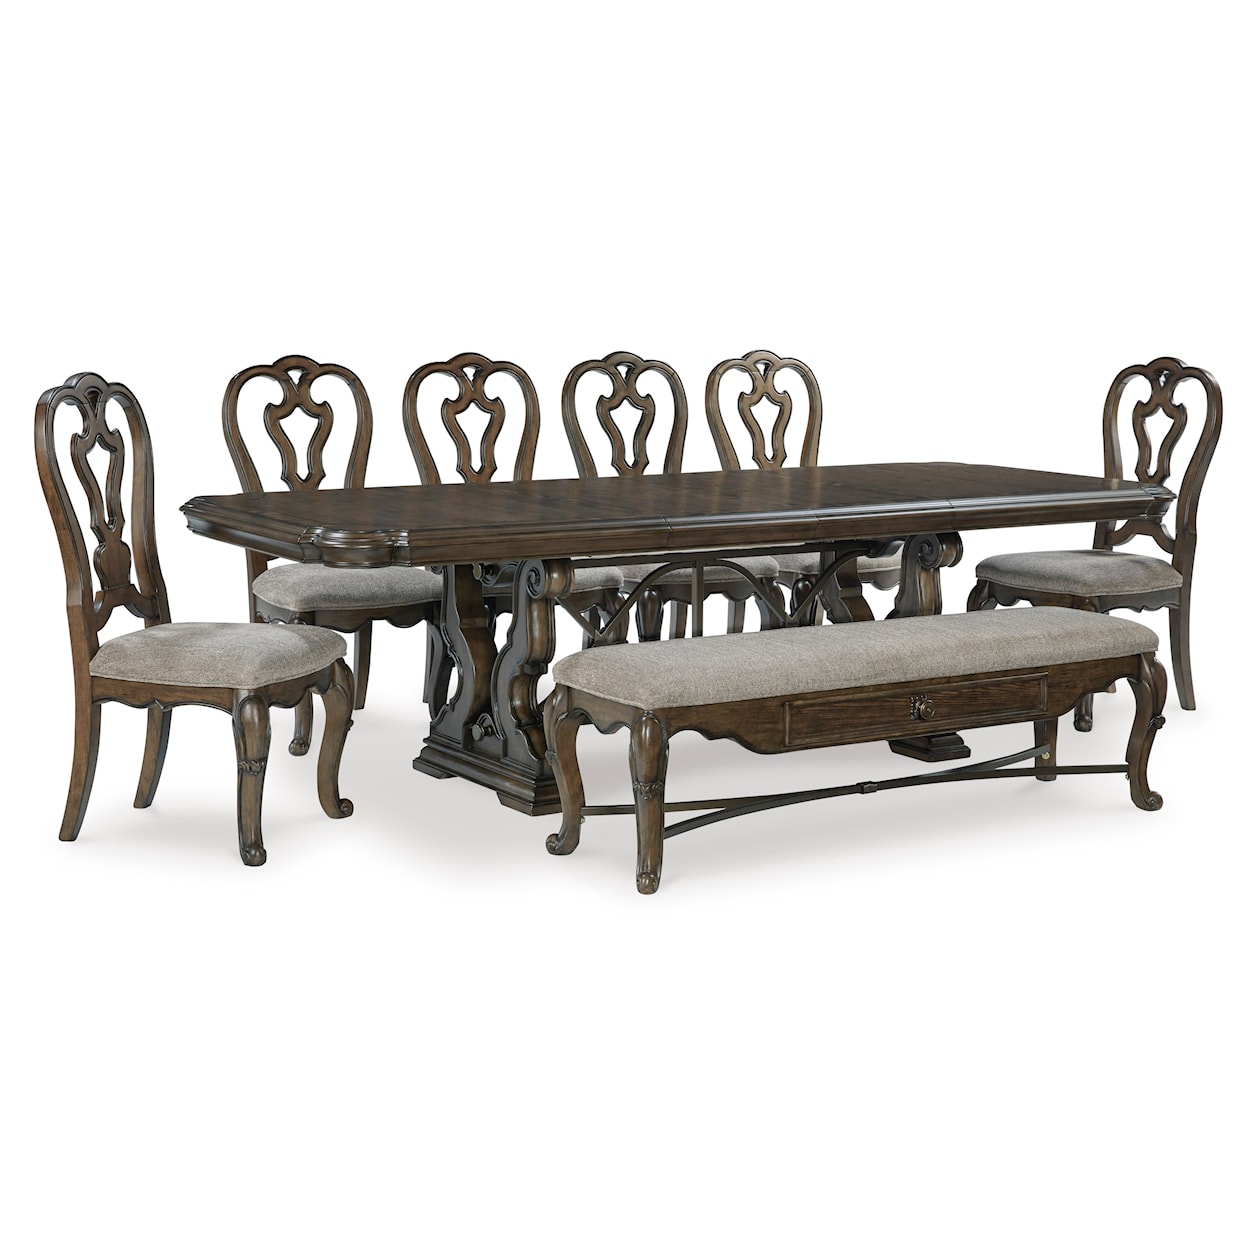 Signature Design Maylee 8-Piece Dining Set with Bench